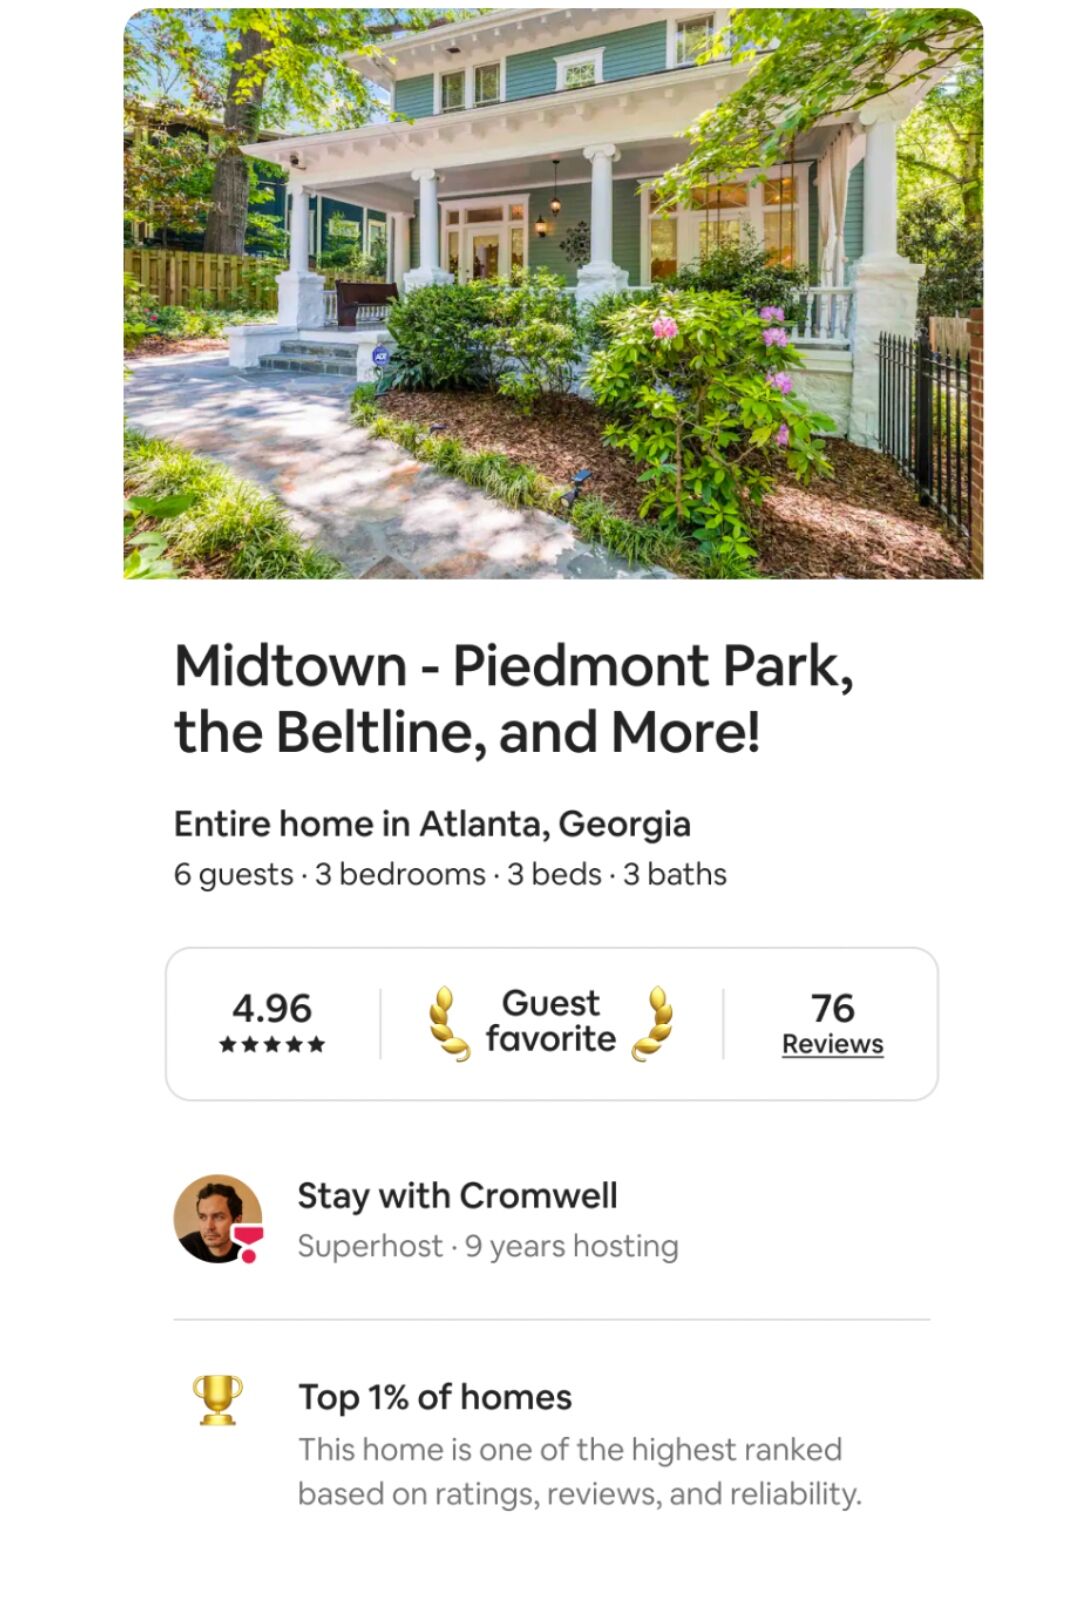 Listing on Airbnb showcasing new gold trophy airbnb listing icon